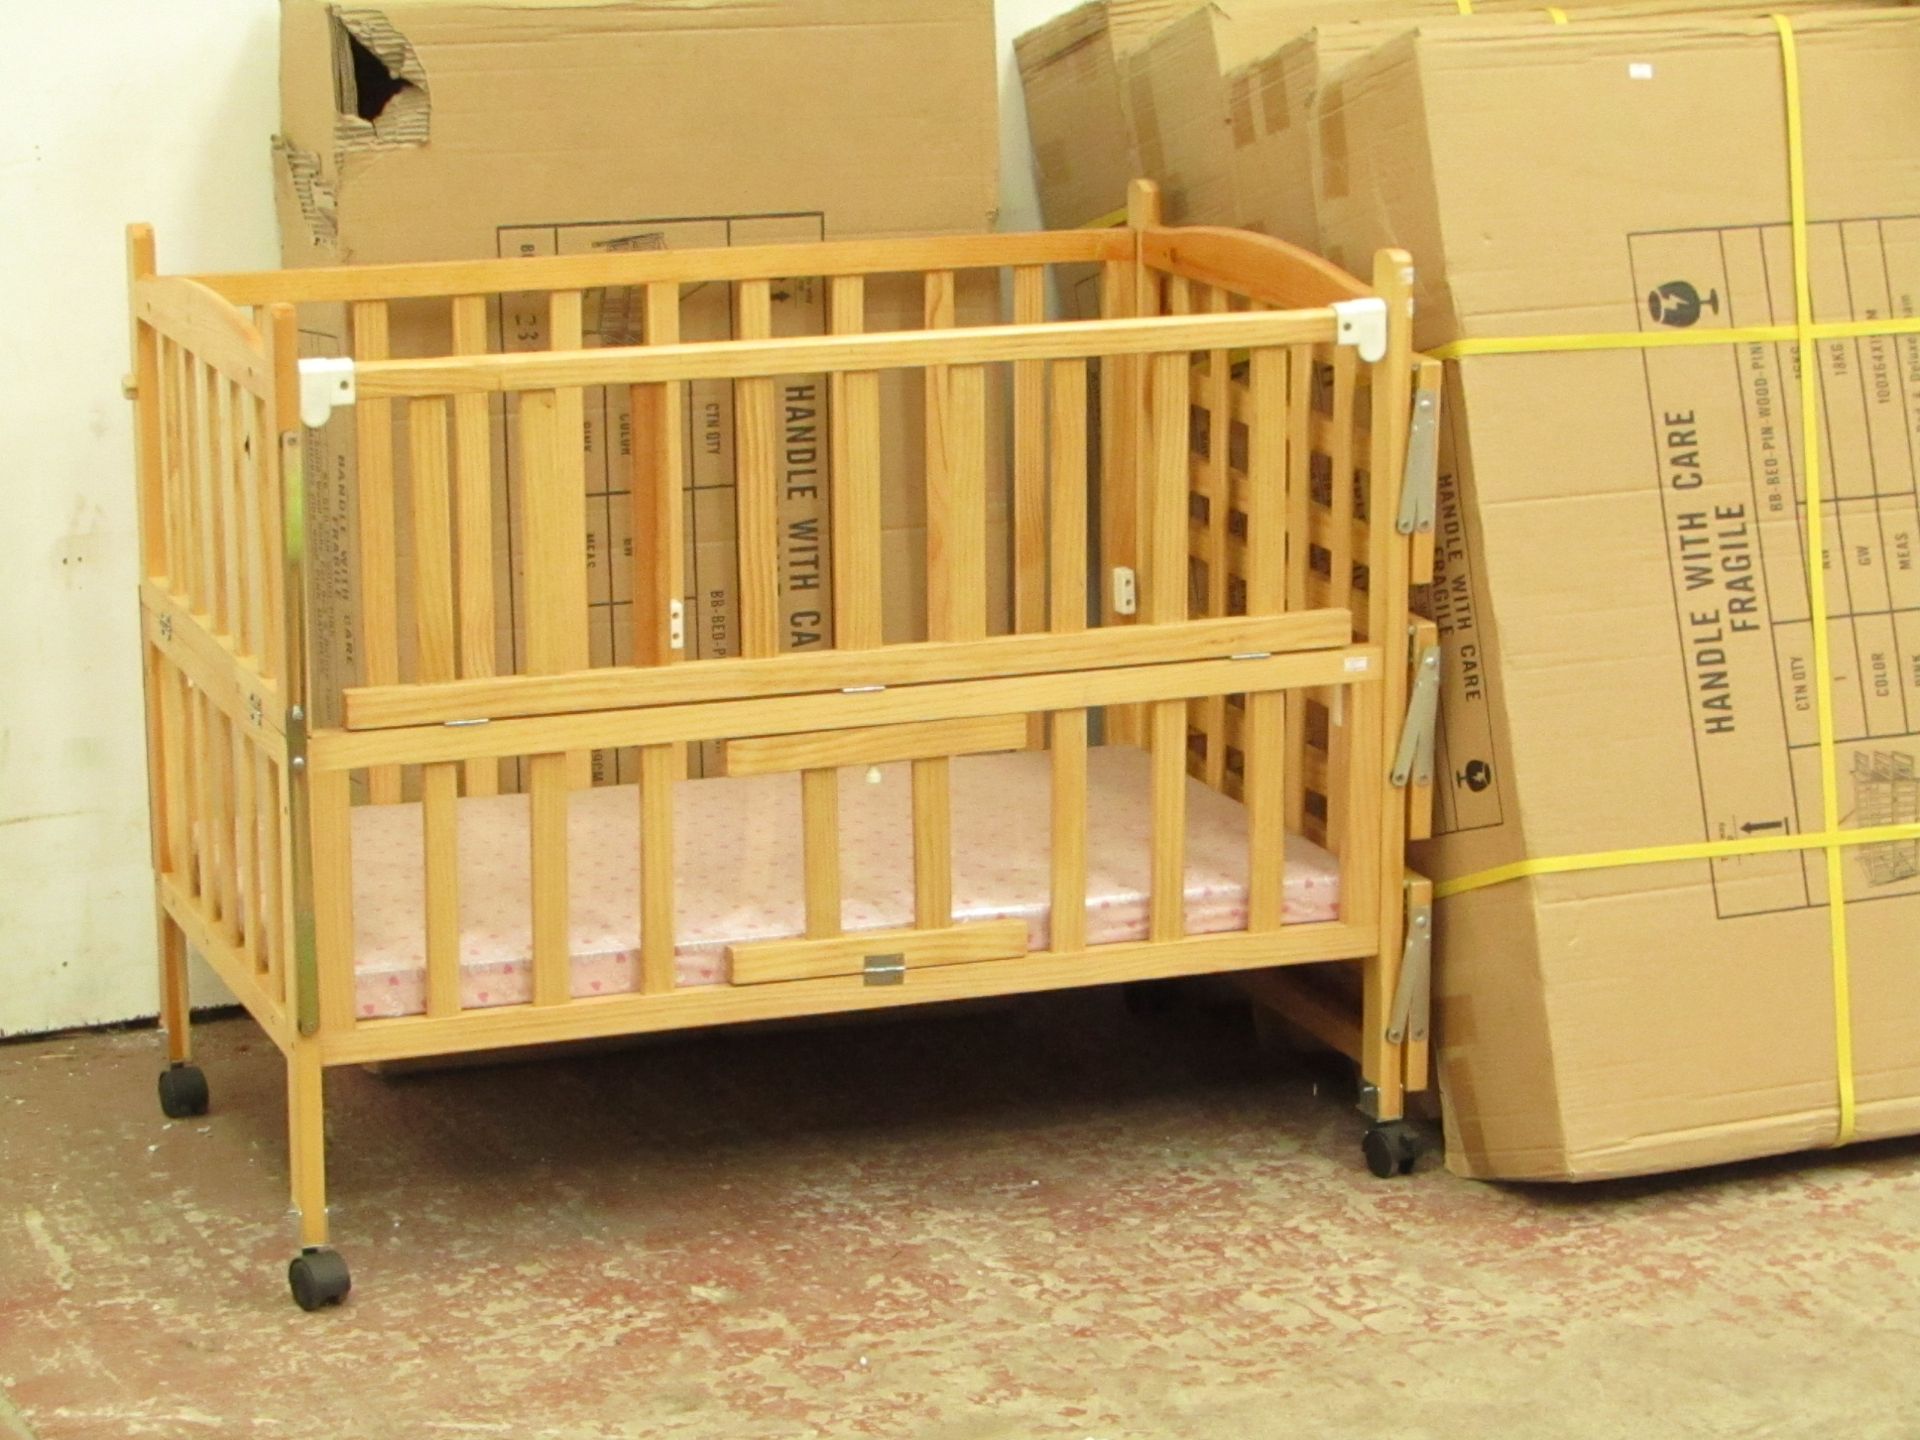 Childs cott with side shelves and Pink mattress, new and boxed.